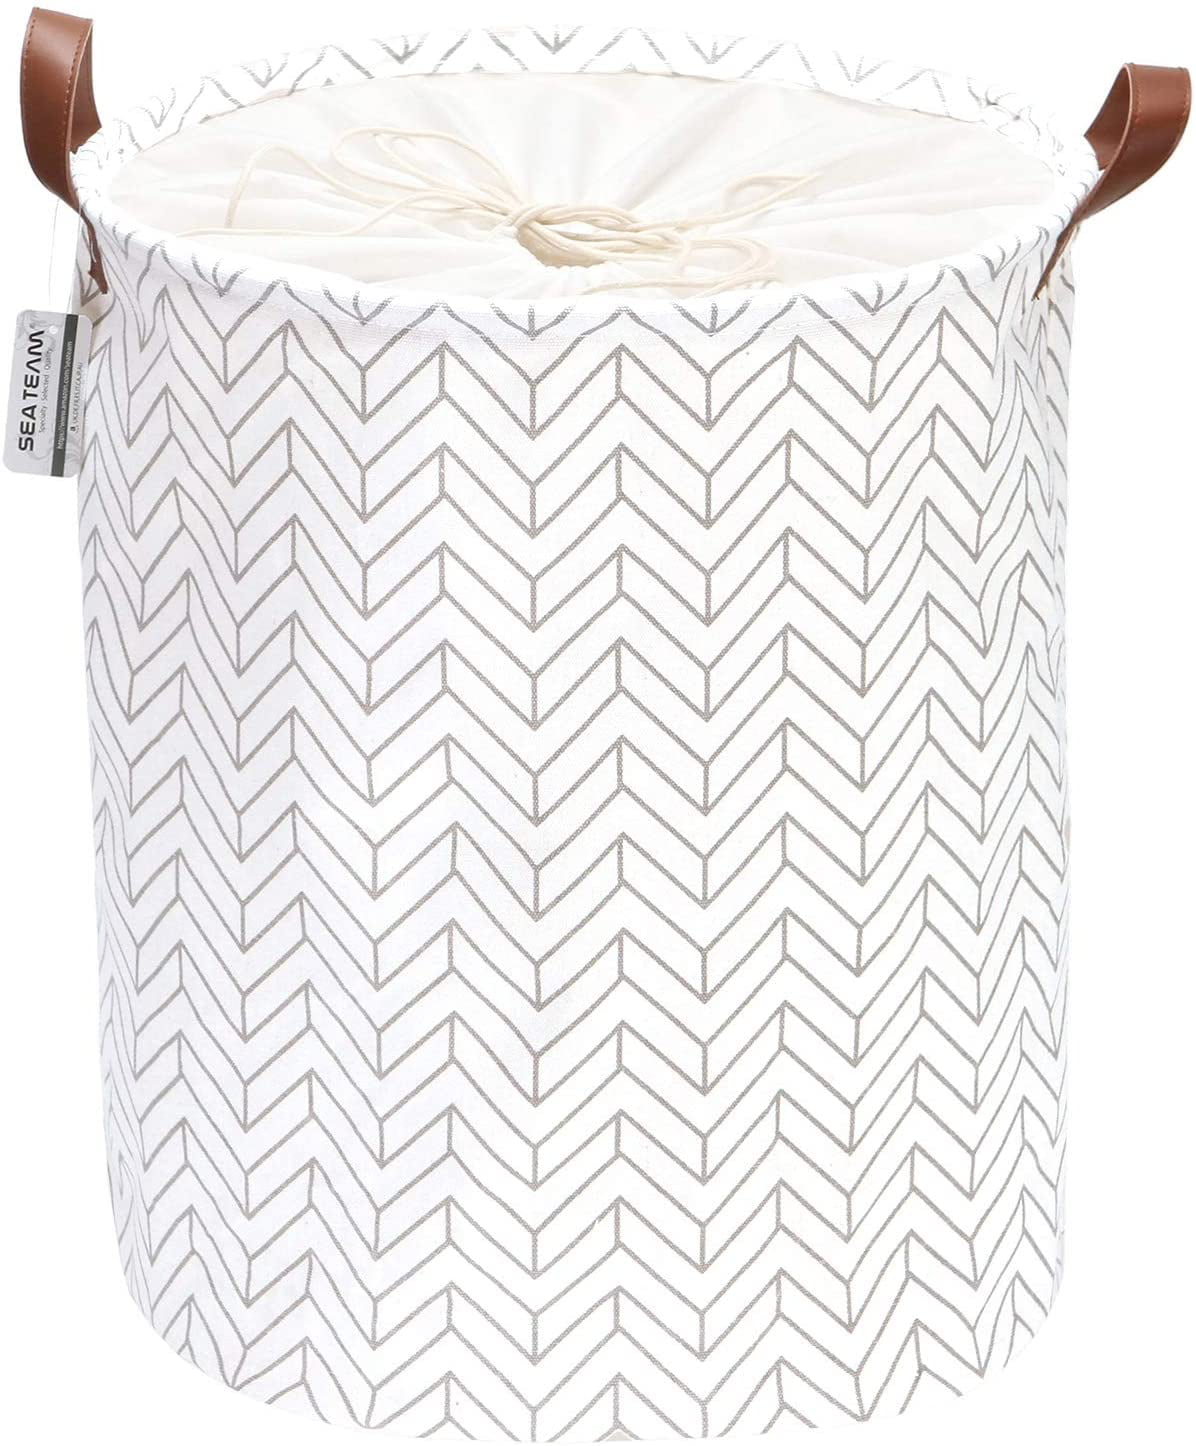 17.7 by 13.8 inches Sea Team Geometry Pattern Laundry Hamper Canvas Fabric Laundry Basket Collapsible Storage Bin with PU Leather Handles and Drawstring Closure Grey Waterproof Inner 